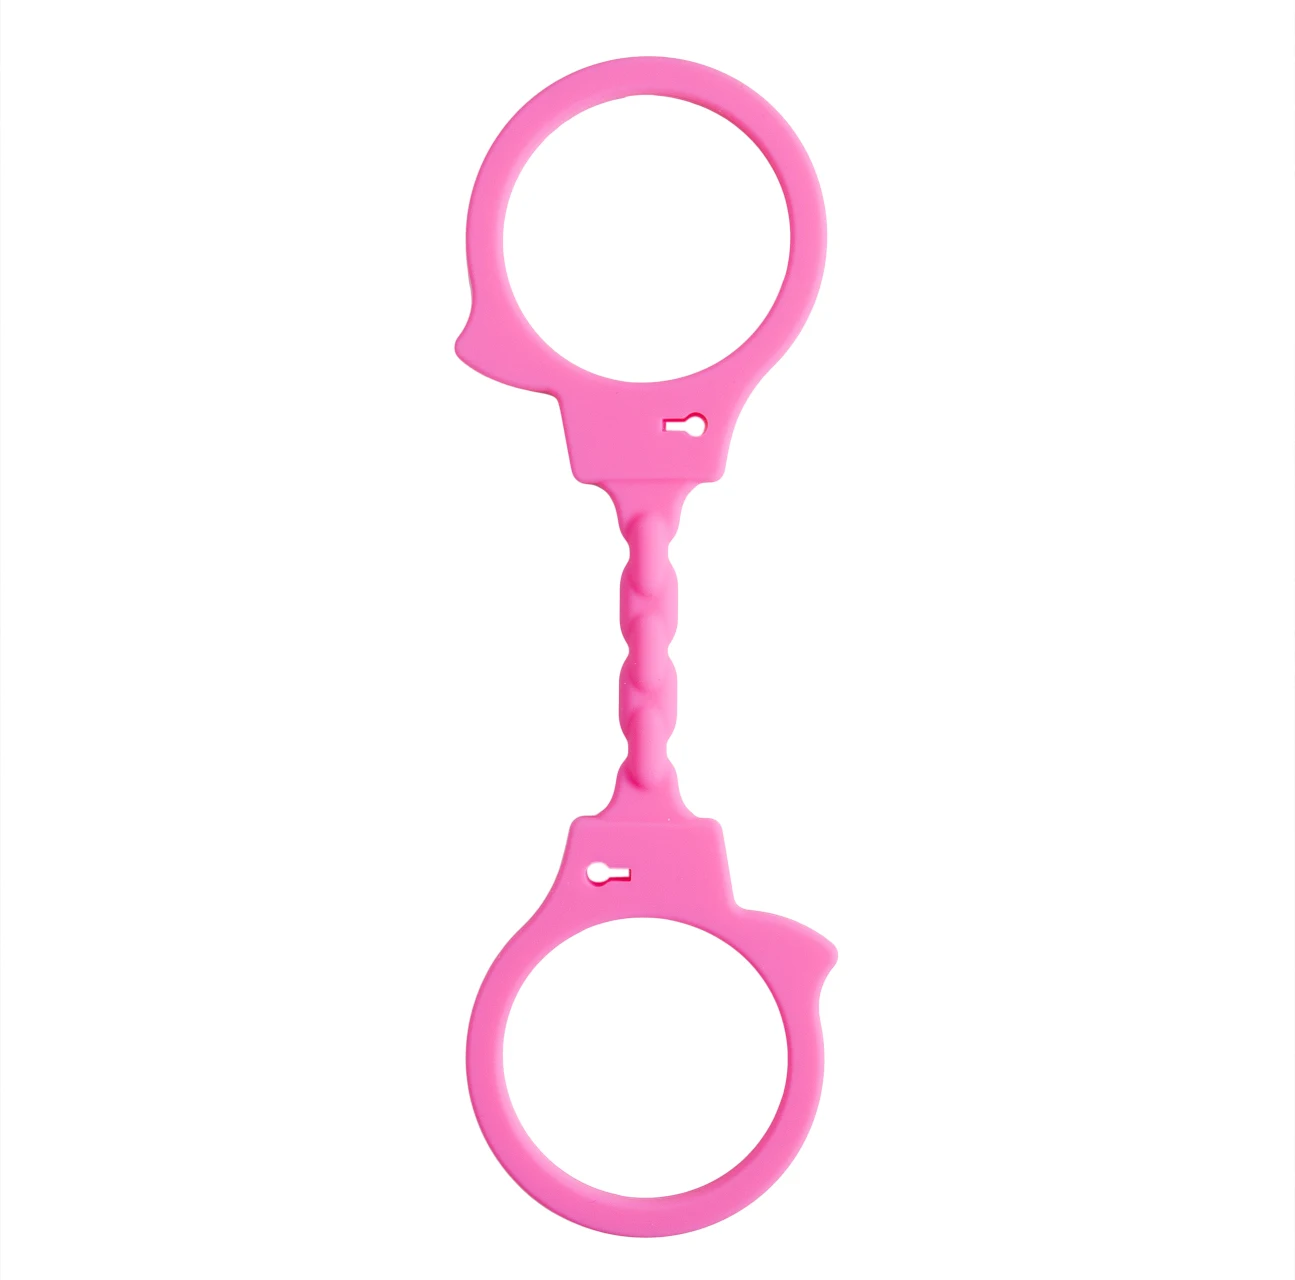 3 Colors New Adult Fantasy Sex Toy Cosplay Handcuffs Adult Night Party Game Favor